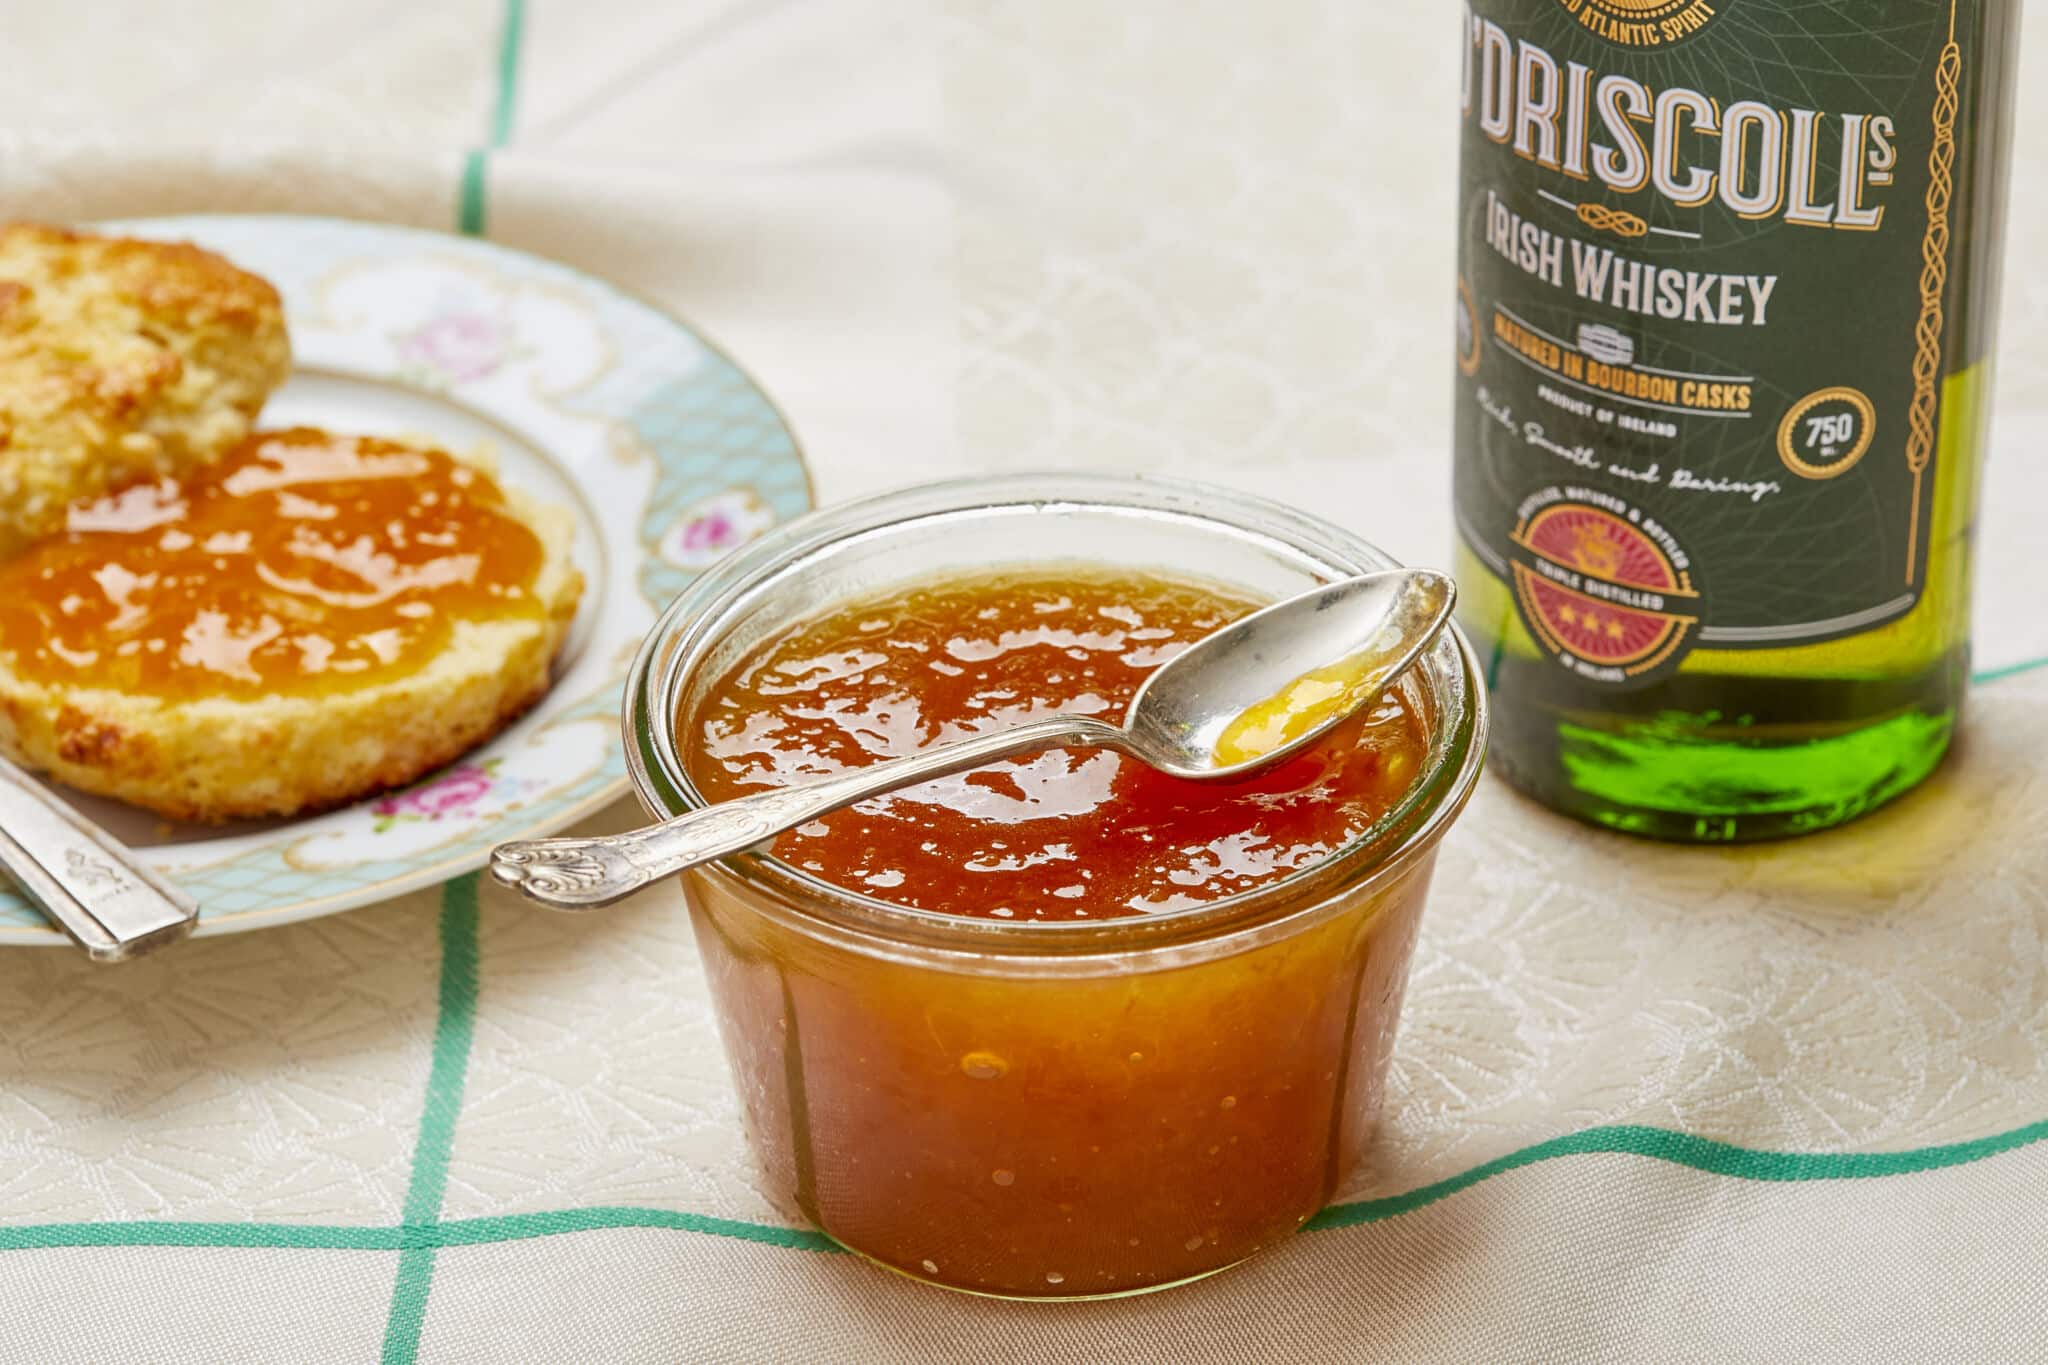 A glass jar of Sweet and Boozy Peach Whiskey Jam is in the middle in vibrant orange color and silky smooth texture. Half scone topped with this spread is on the top left, a bottle of O'Driscoll Irish whiskey is on the right.